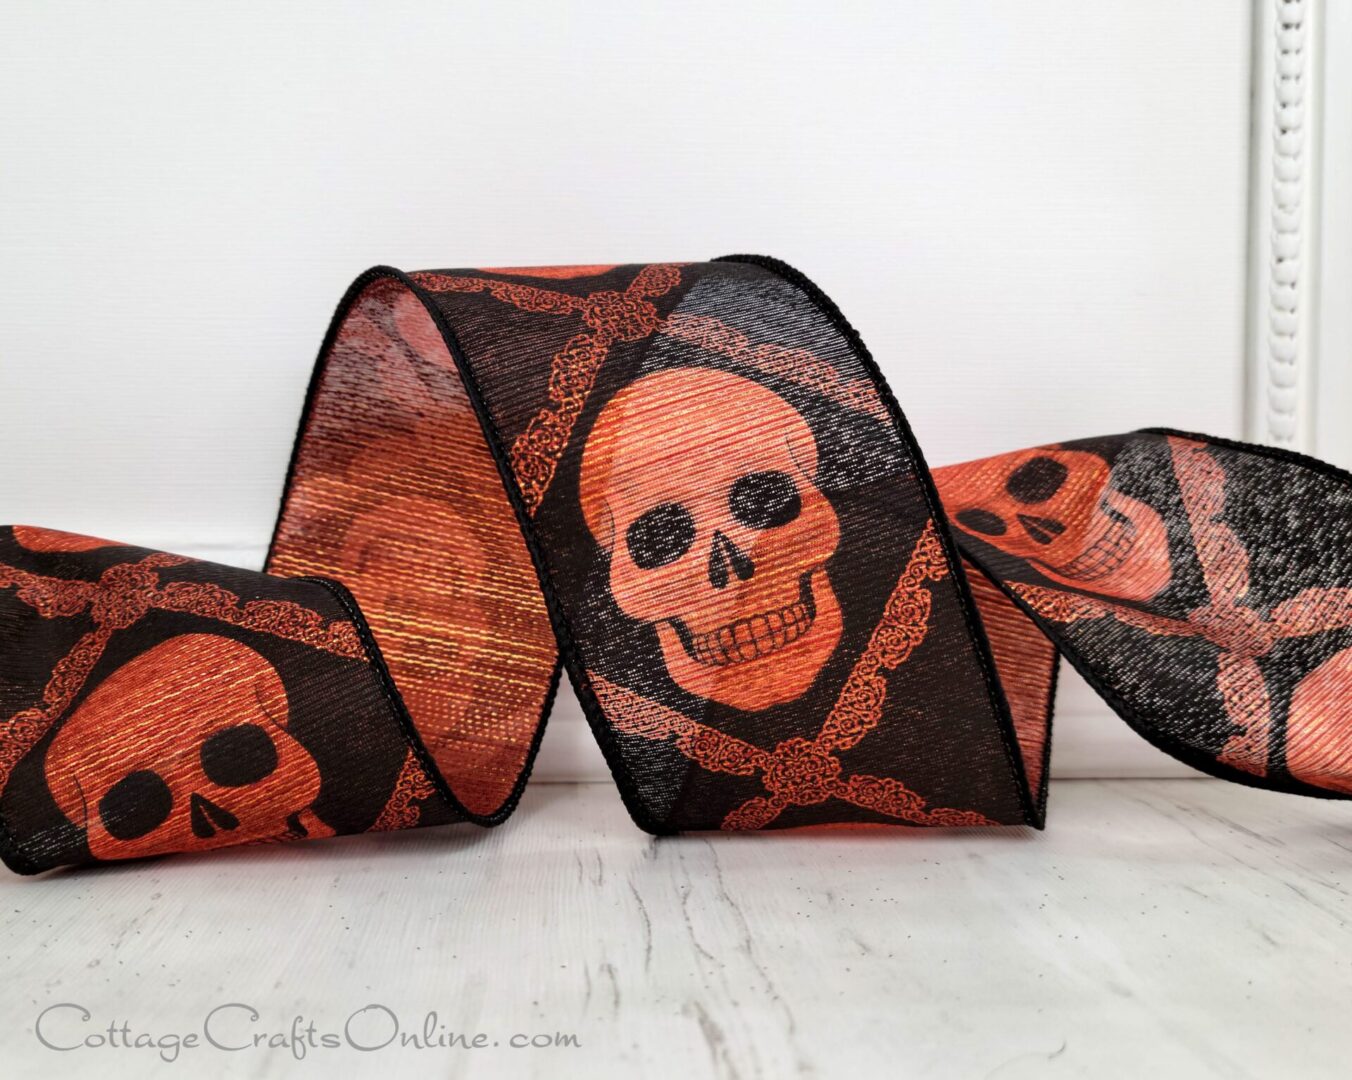 A red and black skull ribbon sitting on top of a table.